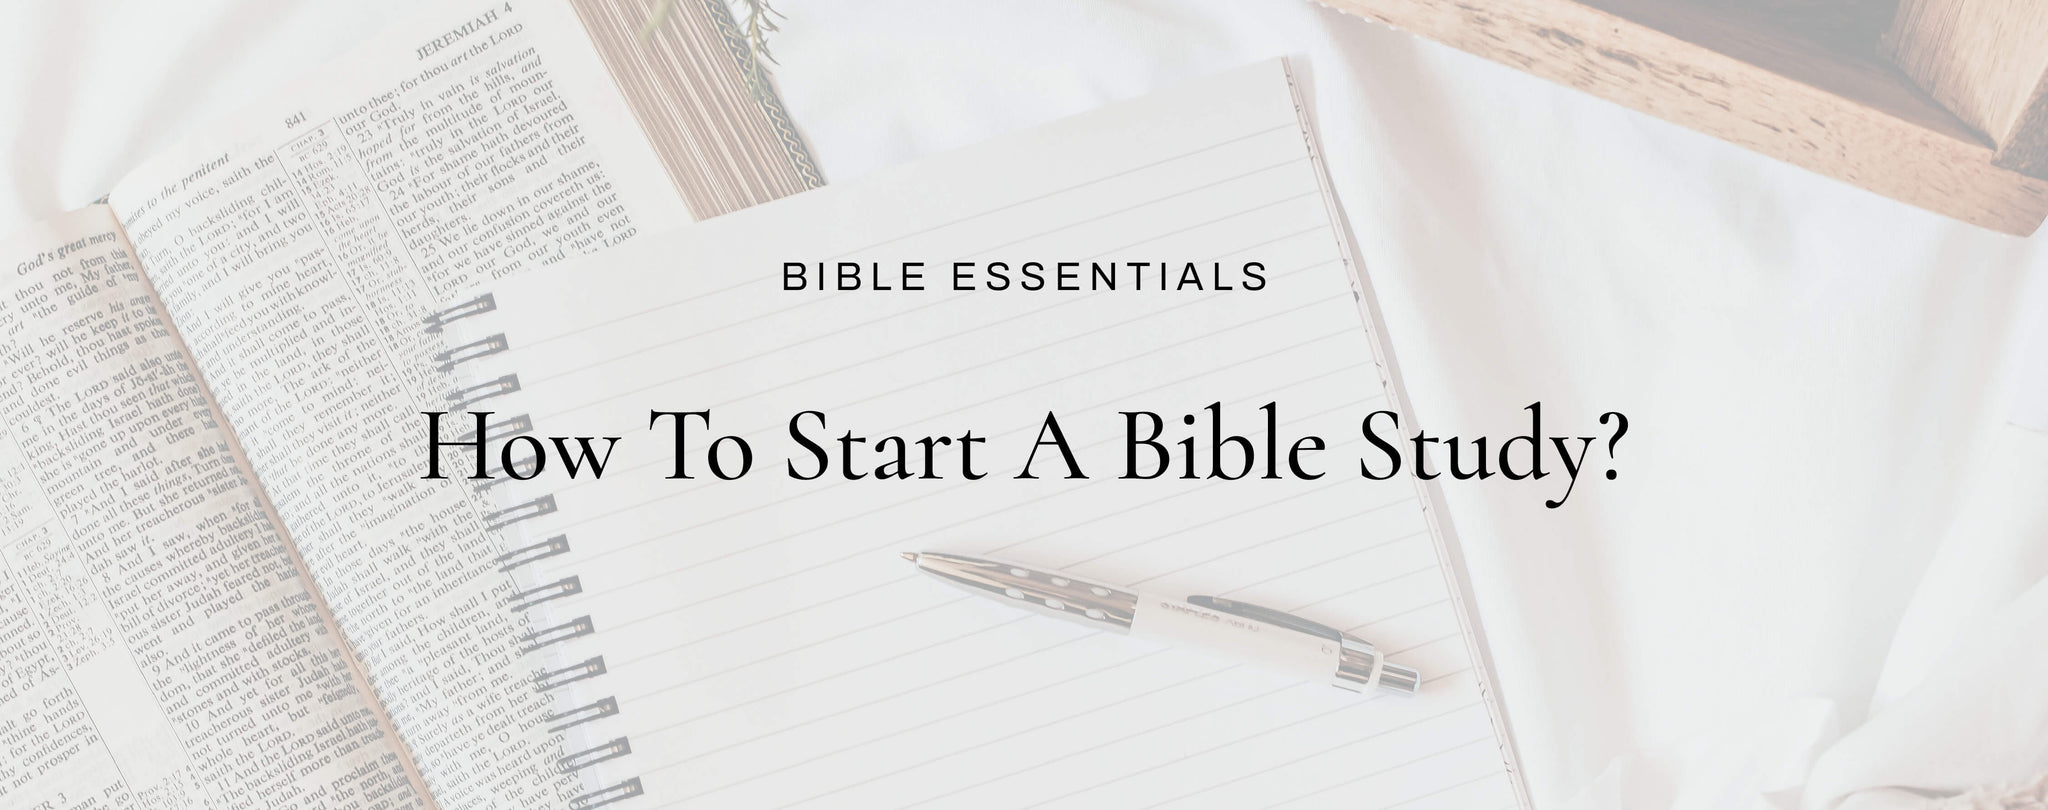 how to start a bible study?